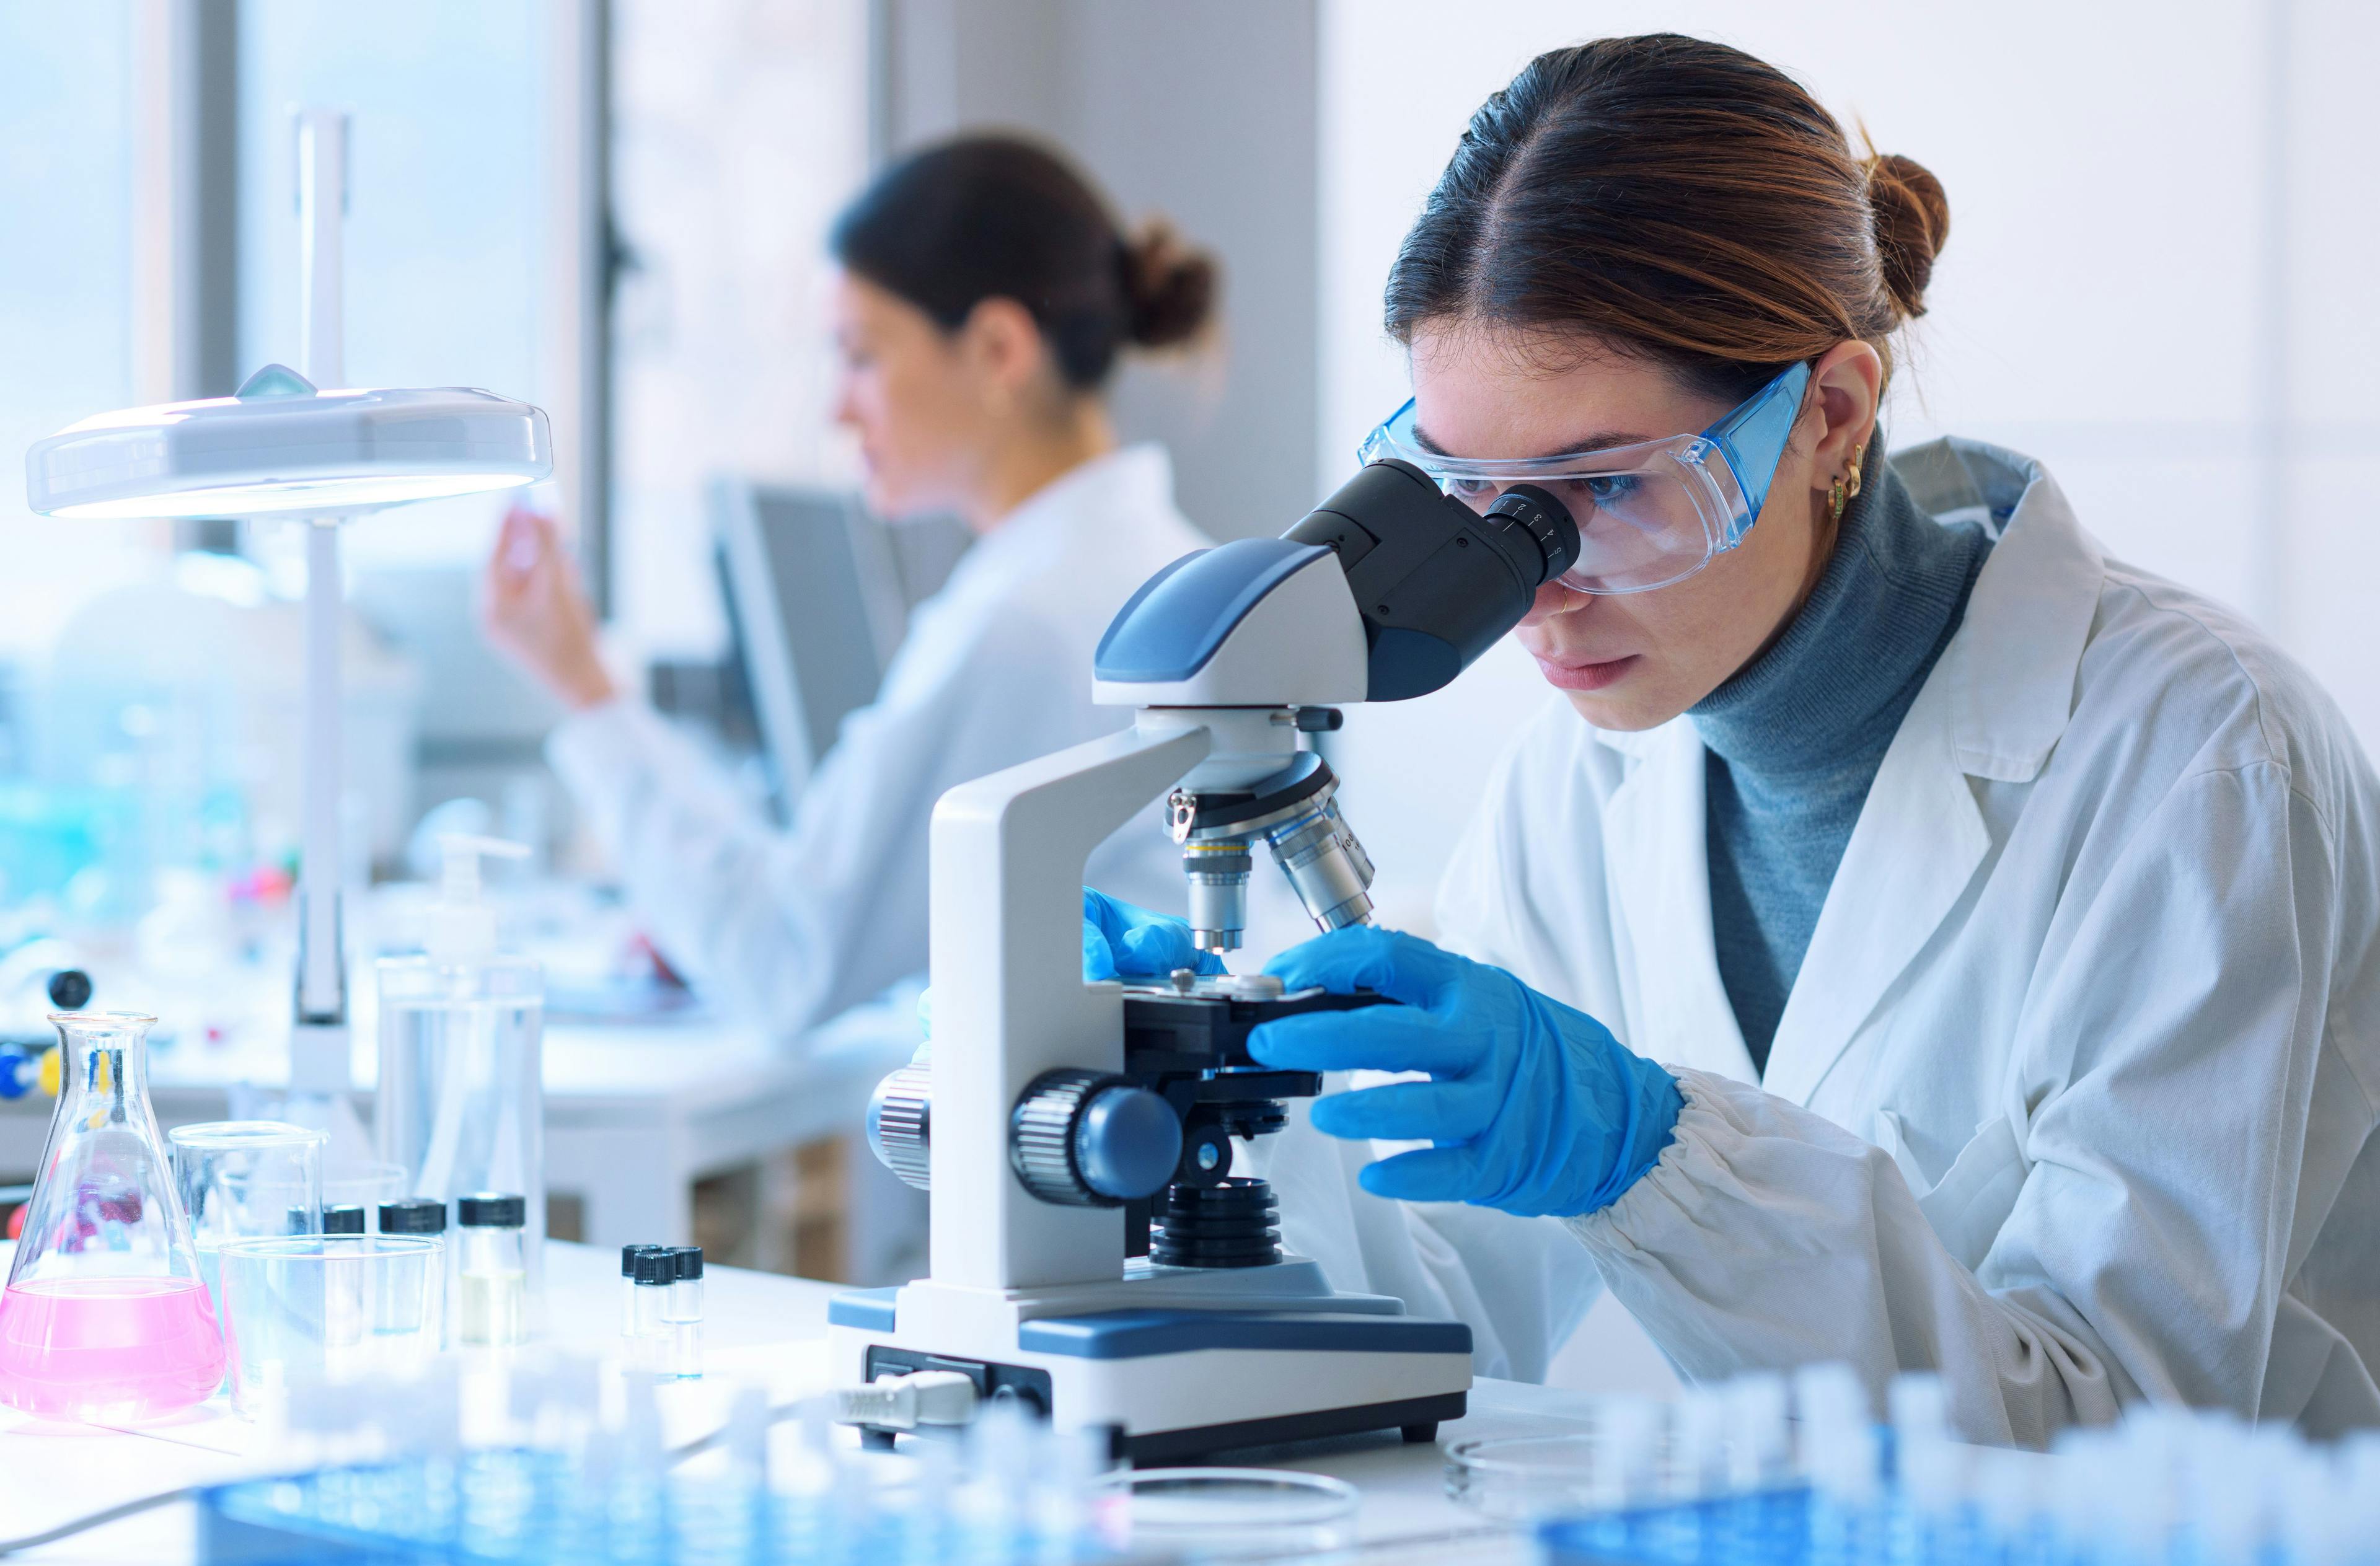 researcher in lab | Image credit: StockPhotoPro - stock.adobe.com